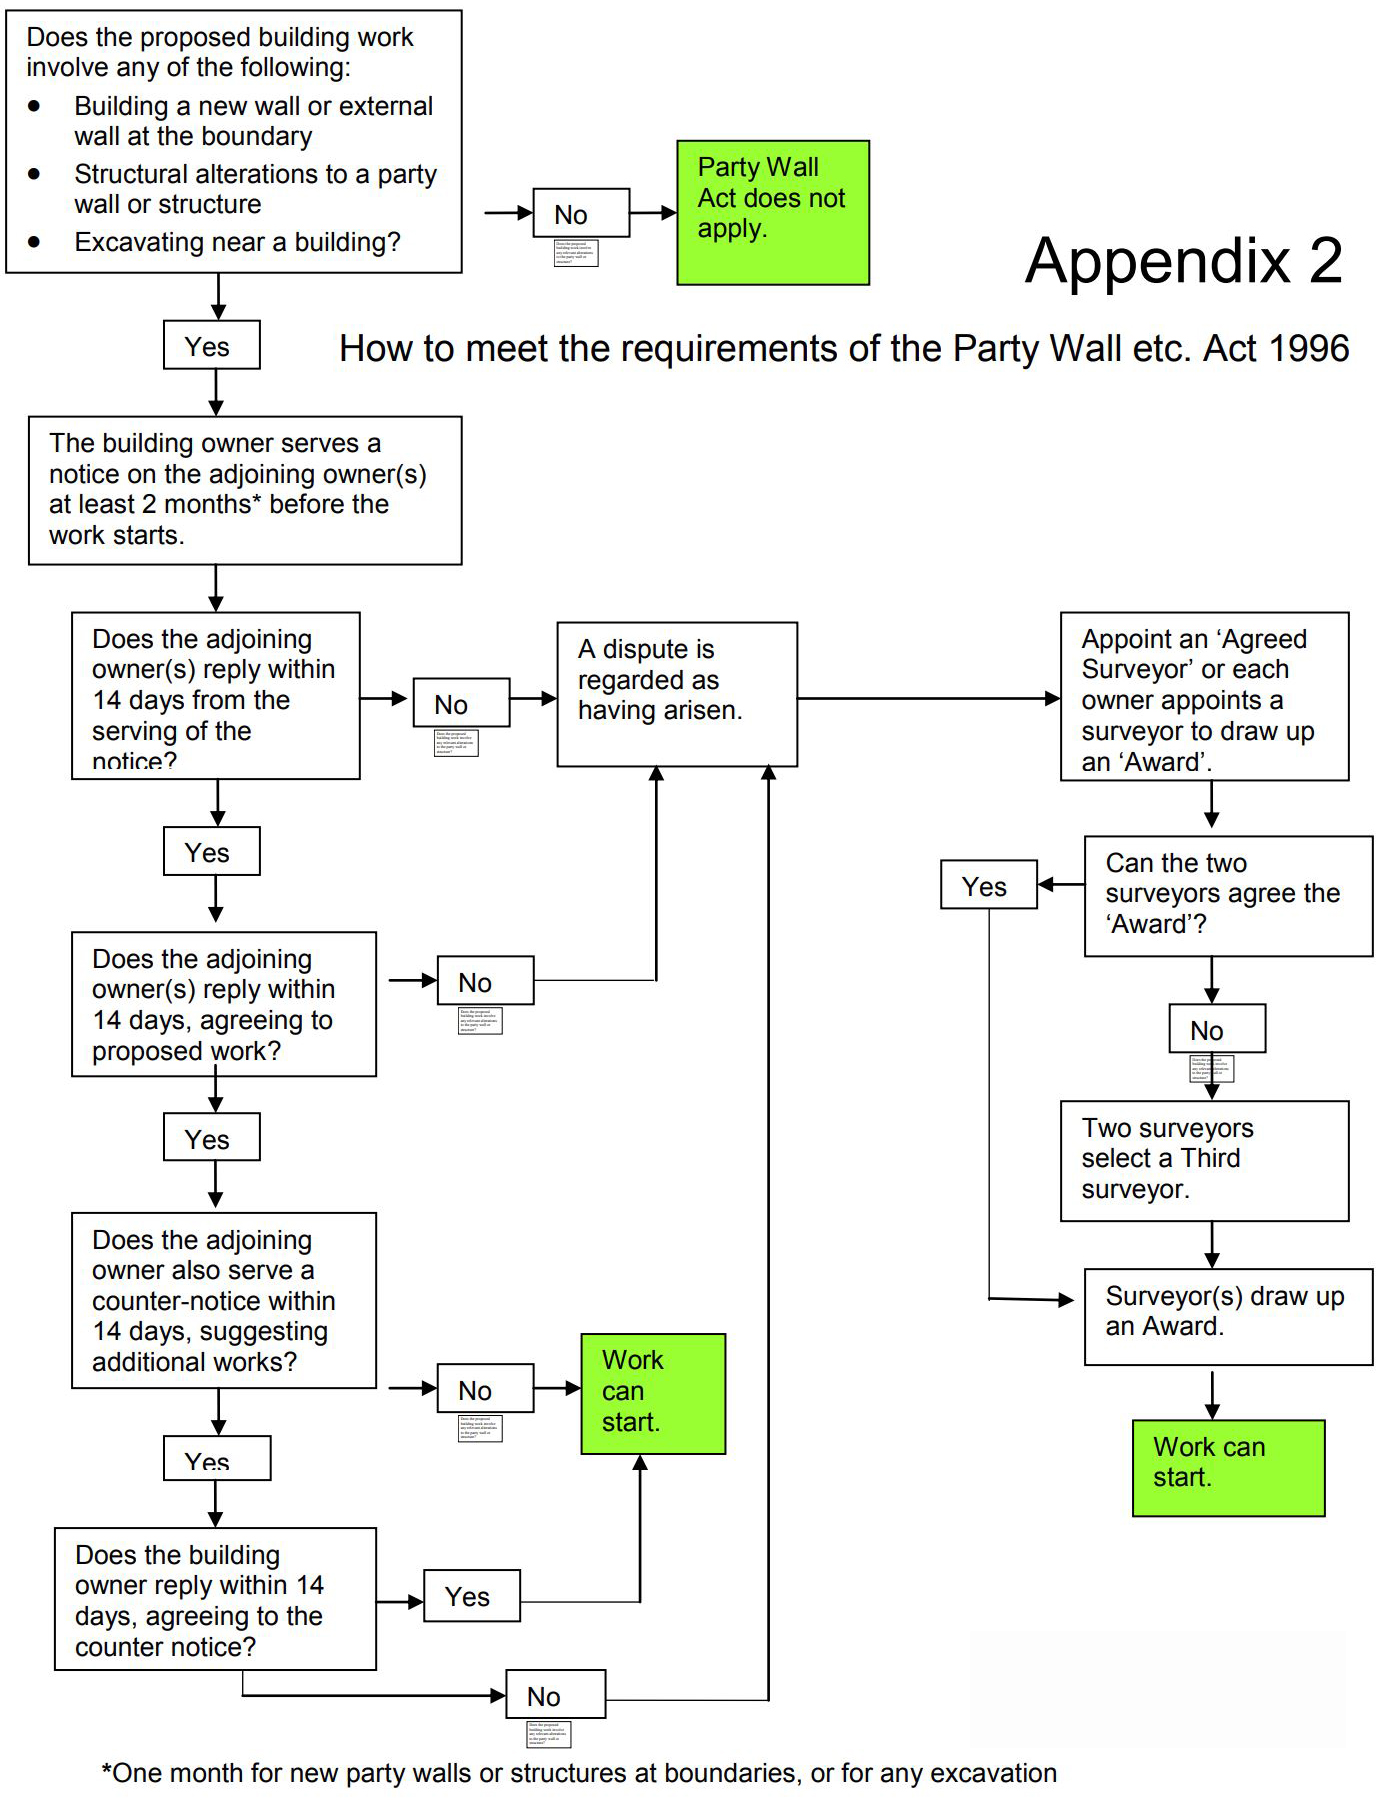 Appendix 2 - Party Wall Act